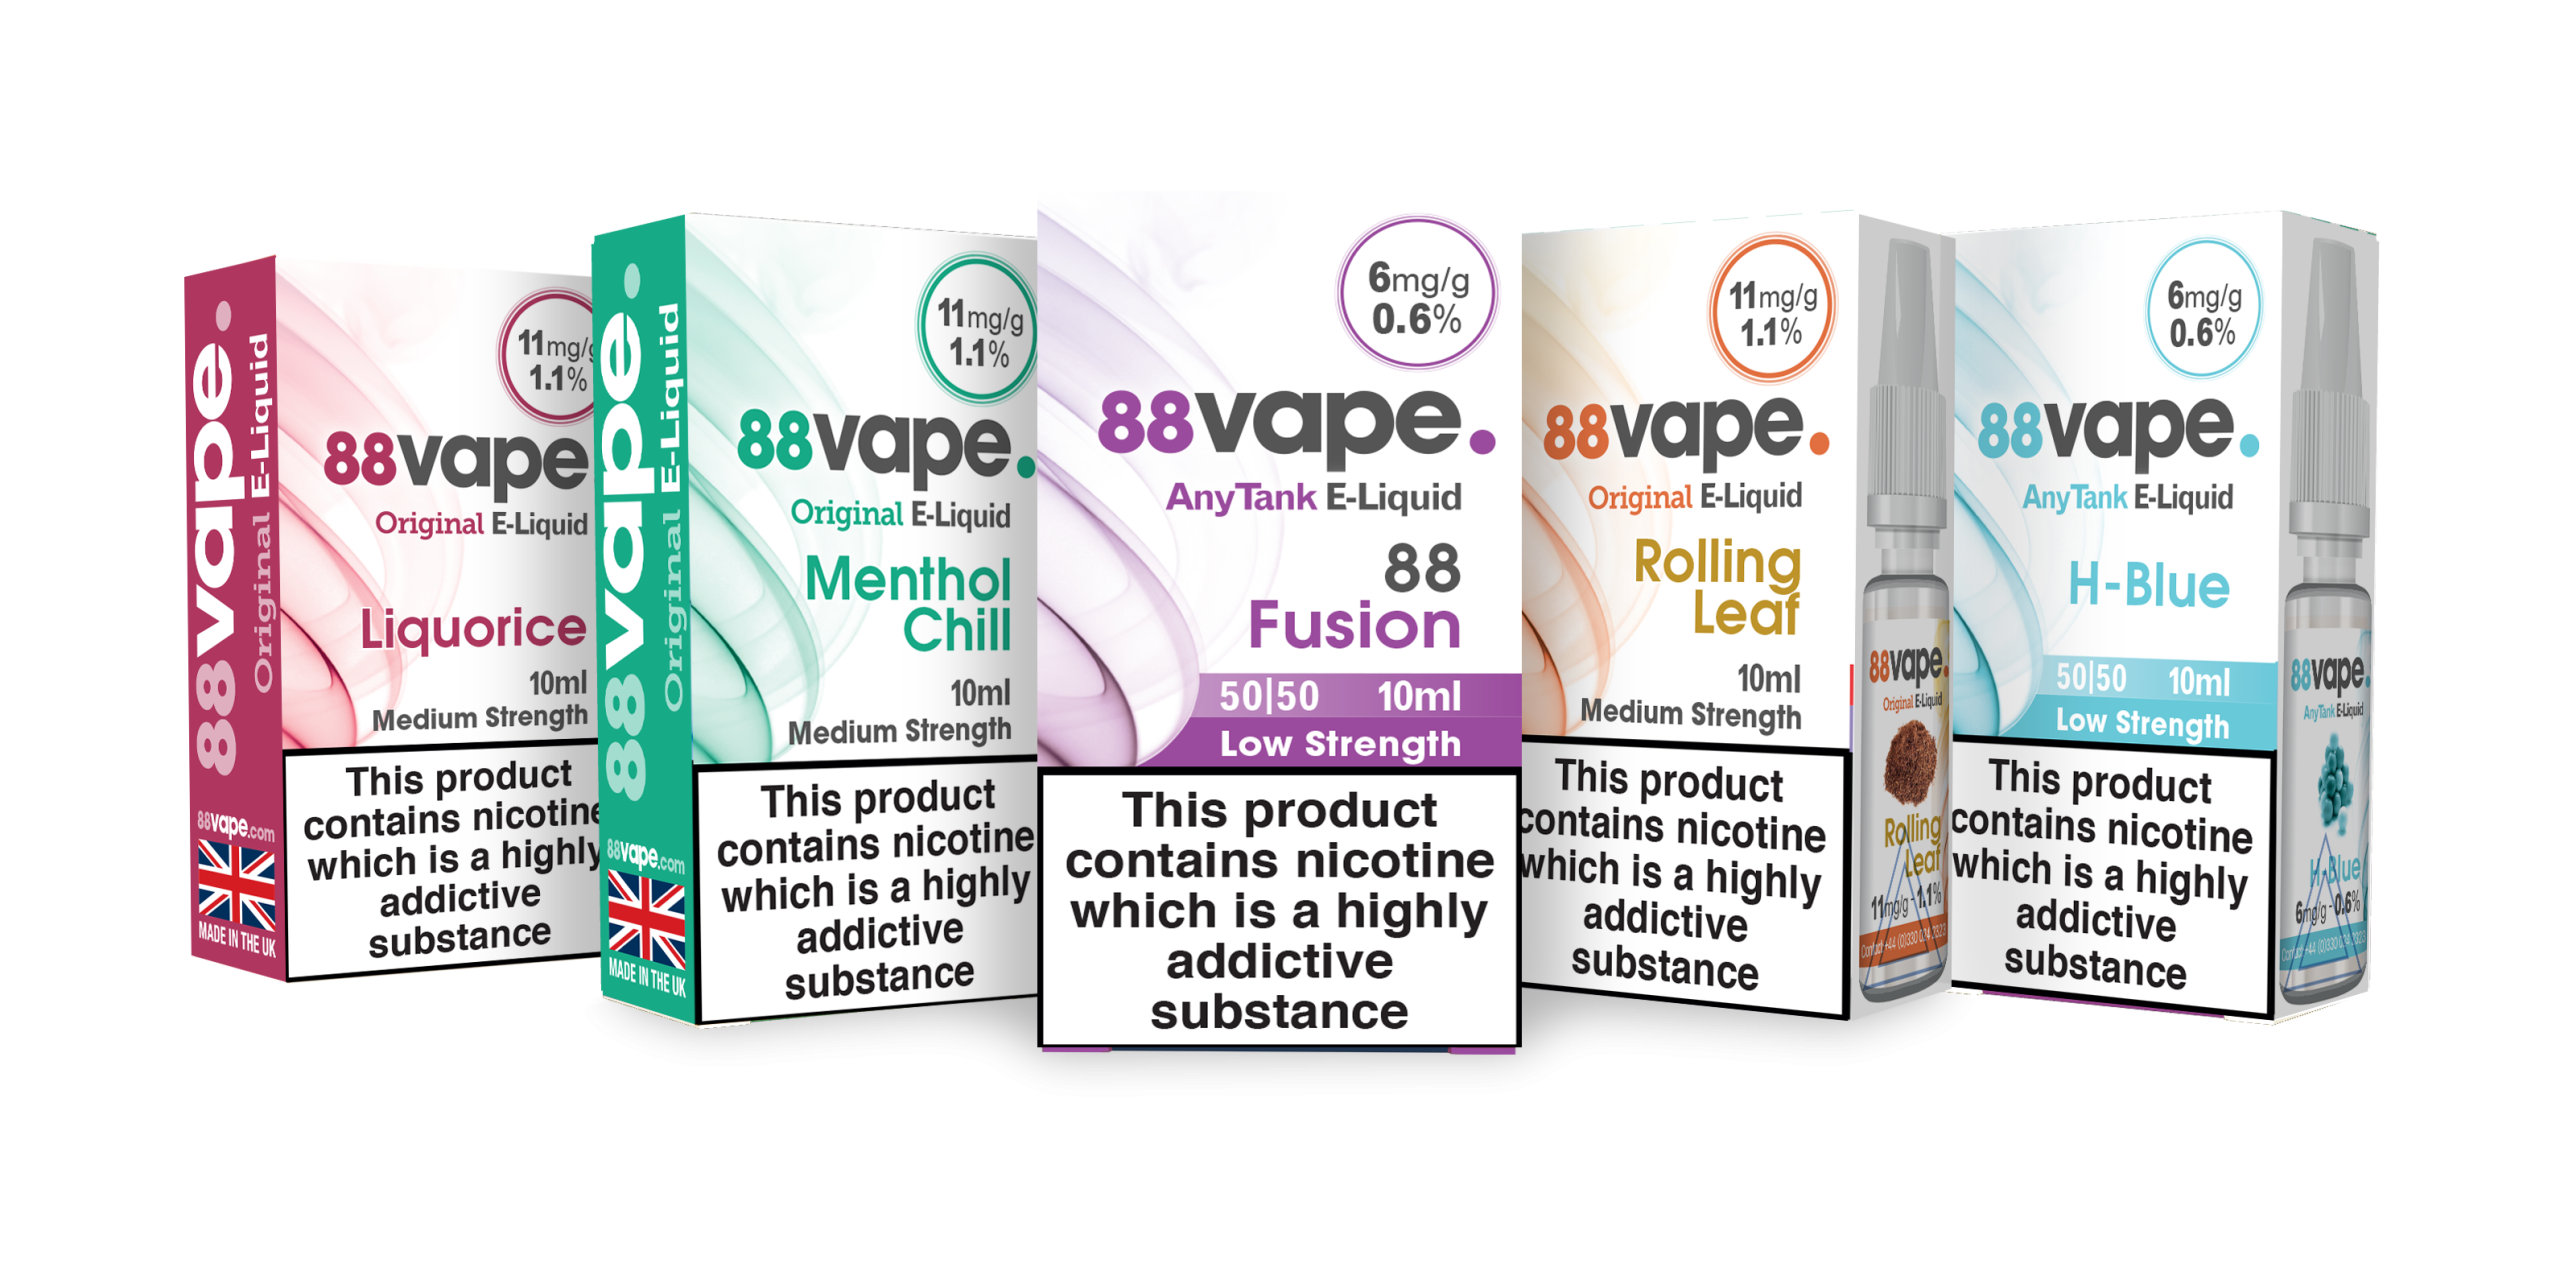 Core introduces exciting 88vape launch deals for indies